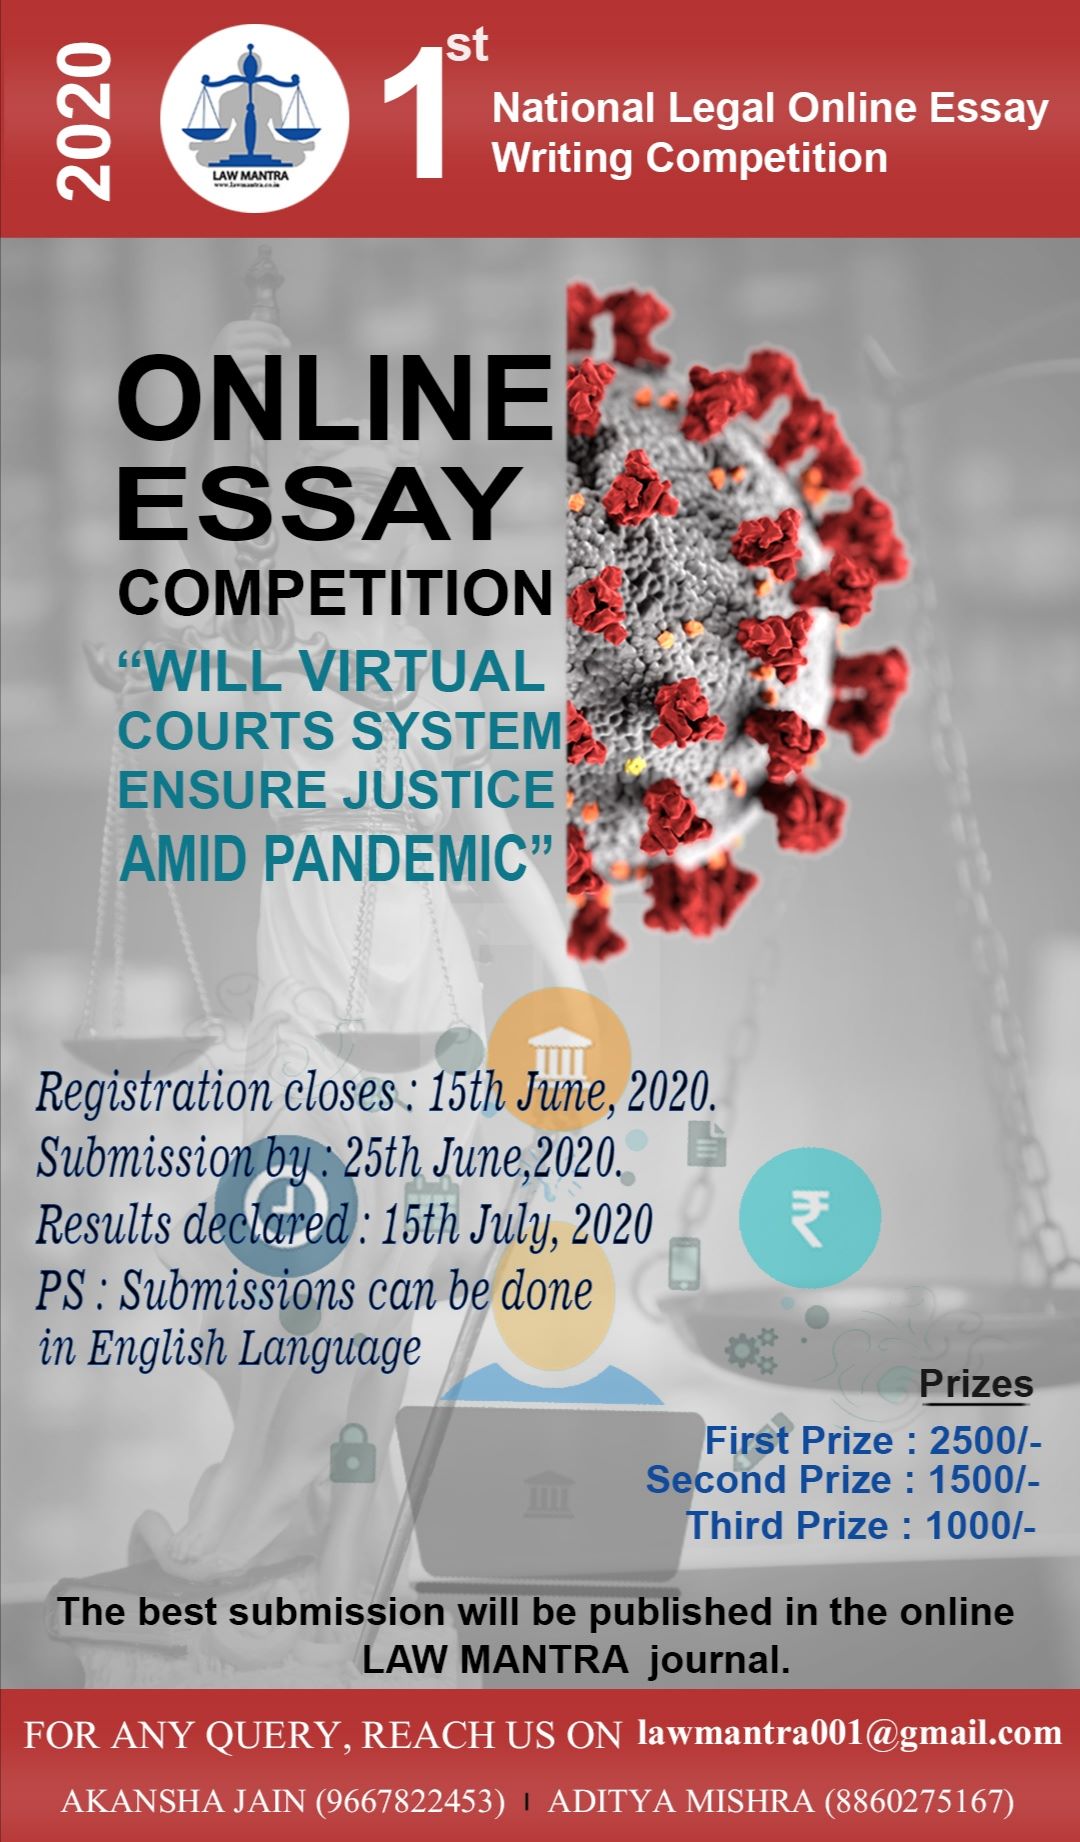 law reform essay competition